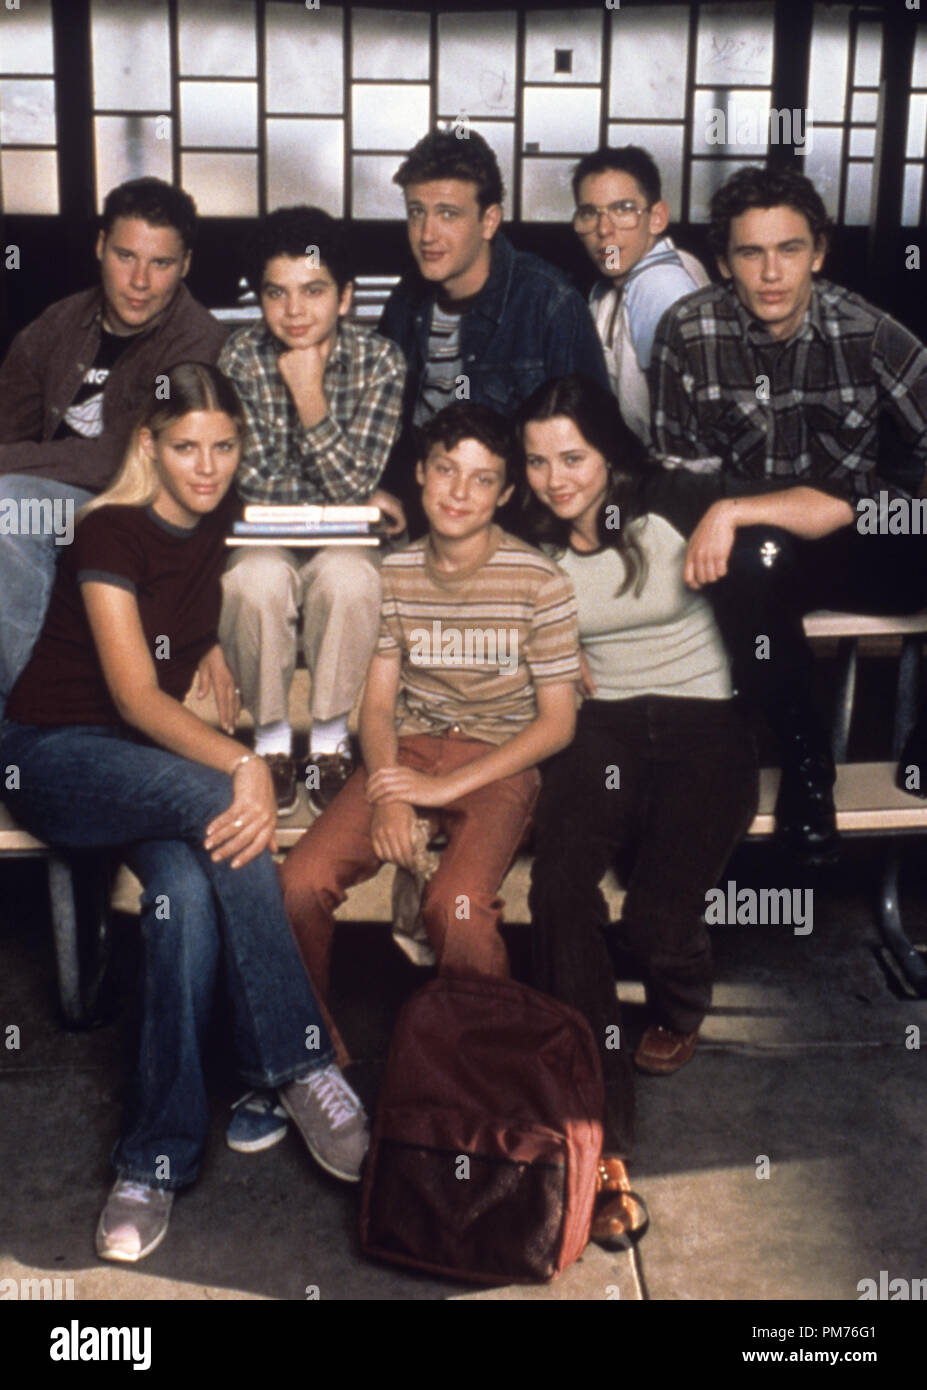 Film Still / Publicity Still from 'Freaks and Geeks' Seth Rogen, Samm Levine, Jason Segel, Martin Starr, James Franco, Linda Cardellini, John Francis Daley, Busy Philipps 1999    File Reference # 30973340THA  For Editorial Use Only -  All Rights Reserved Stock Photo